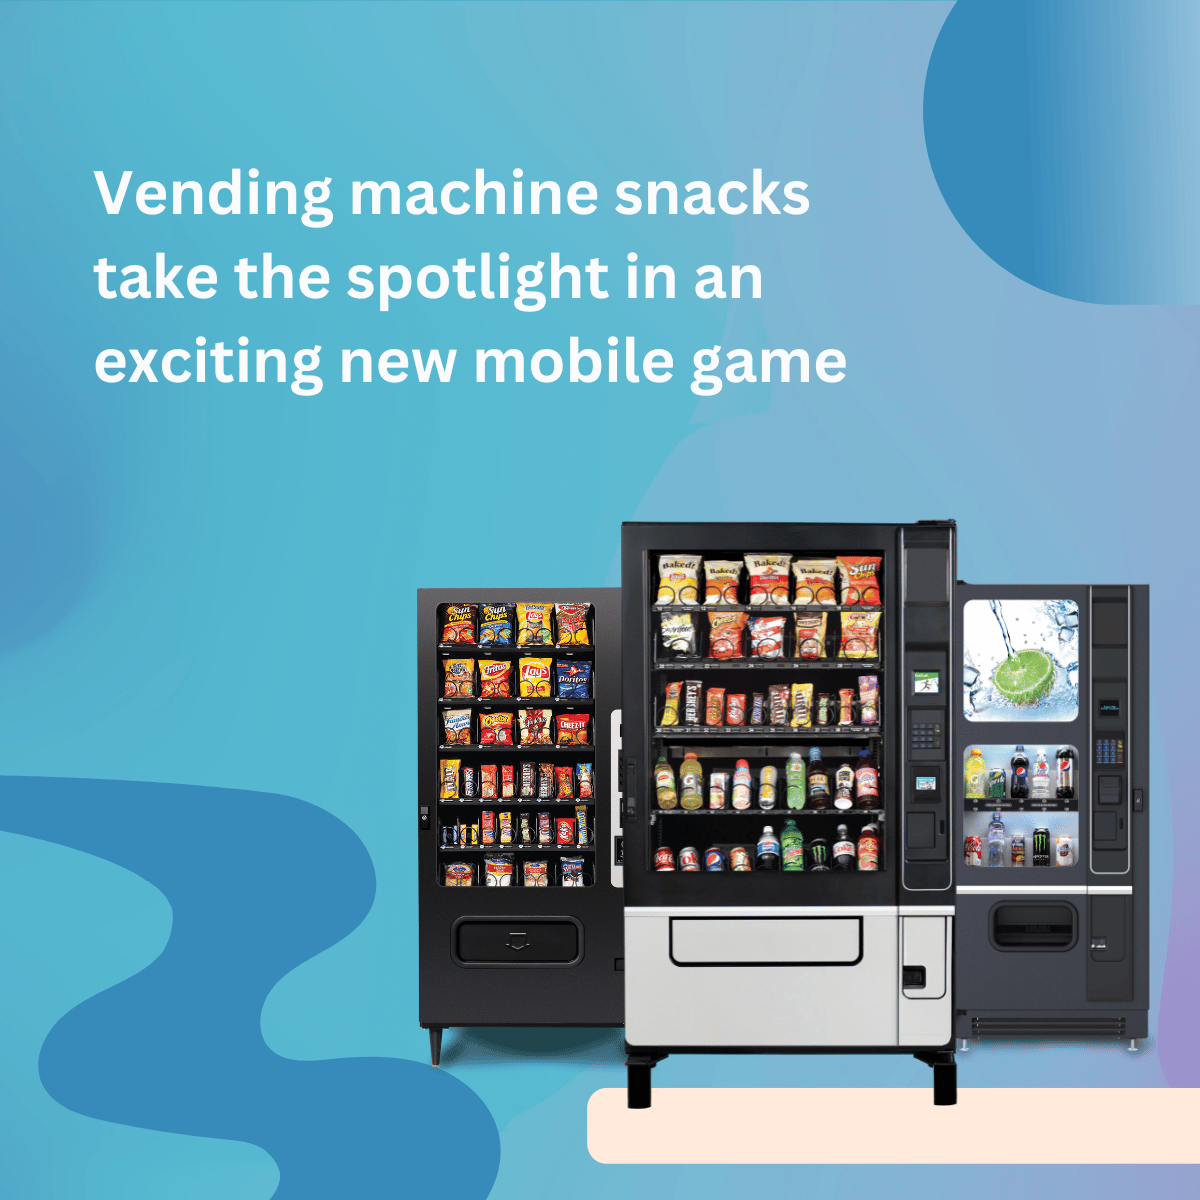 VENDING MACHINE SNACKS ARE THE STARS OF NEW MOBILE GAME